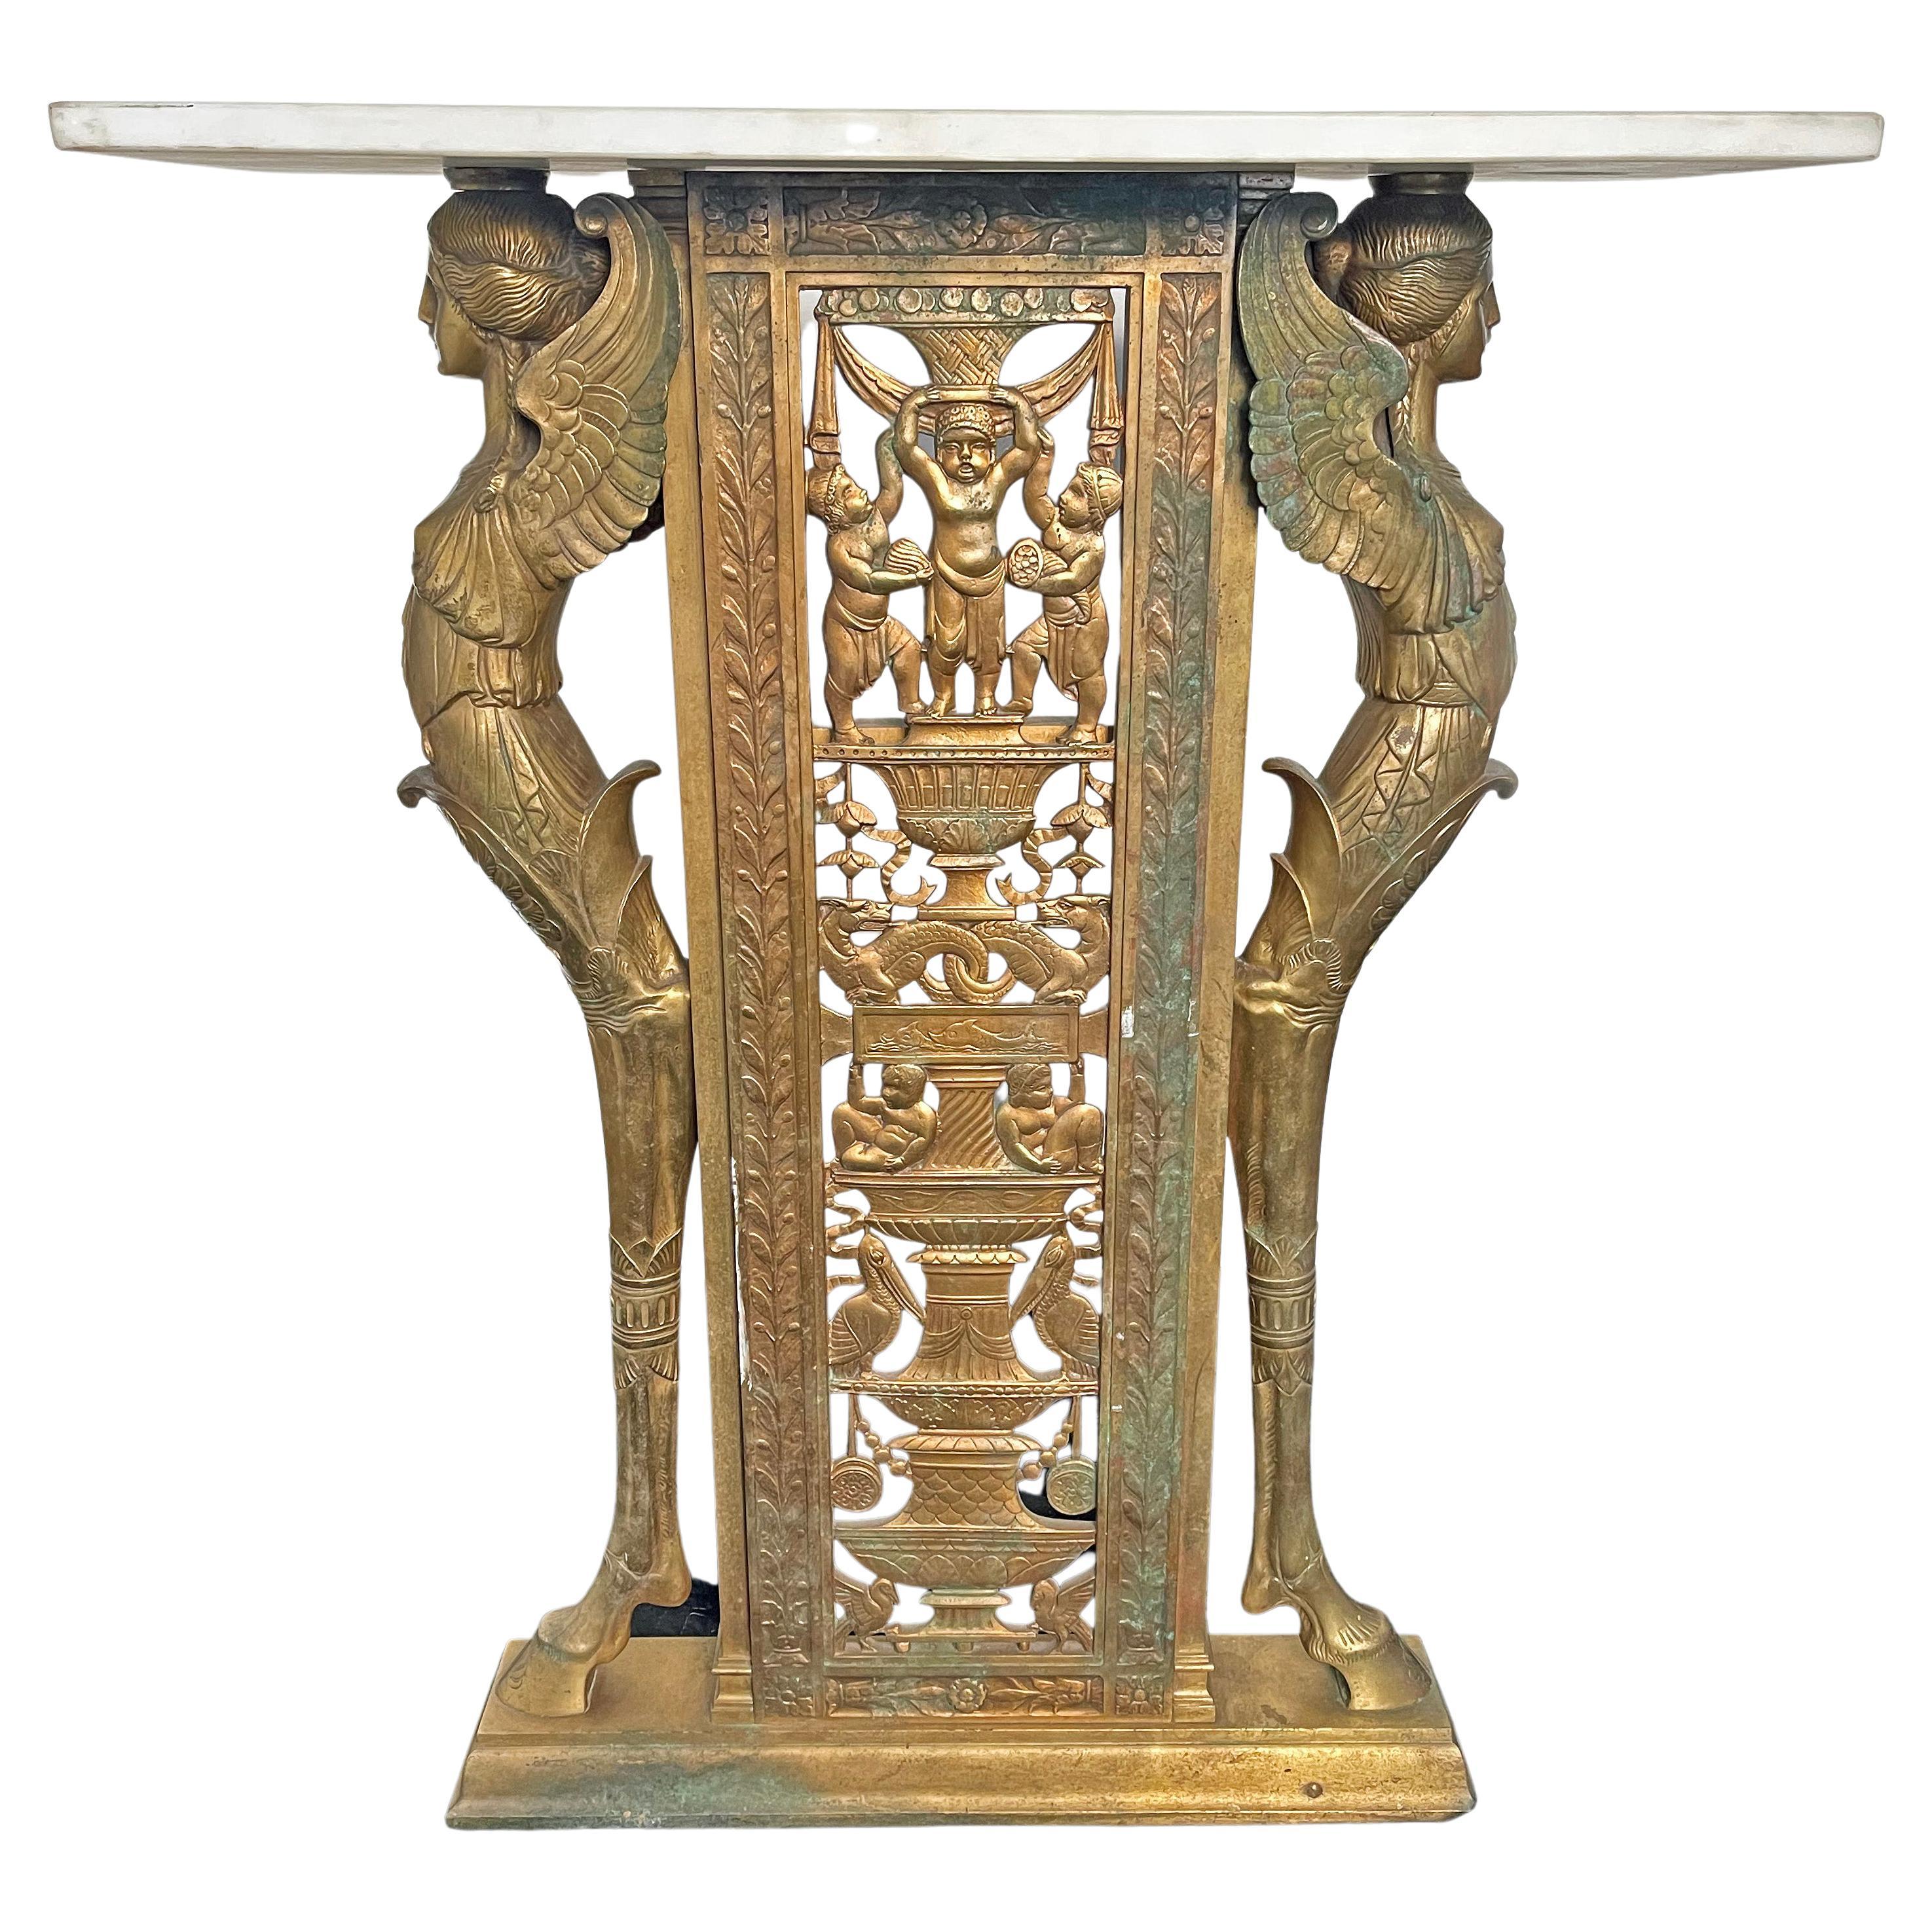 Art Deco Bronze & Marble Console Table with Dolphins, Pelicans and Dragons